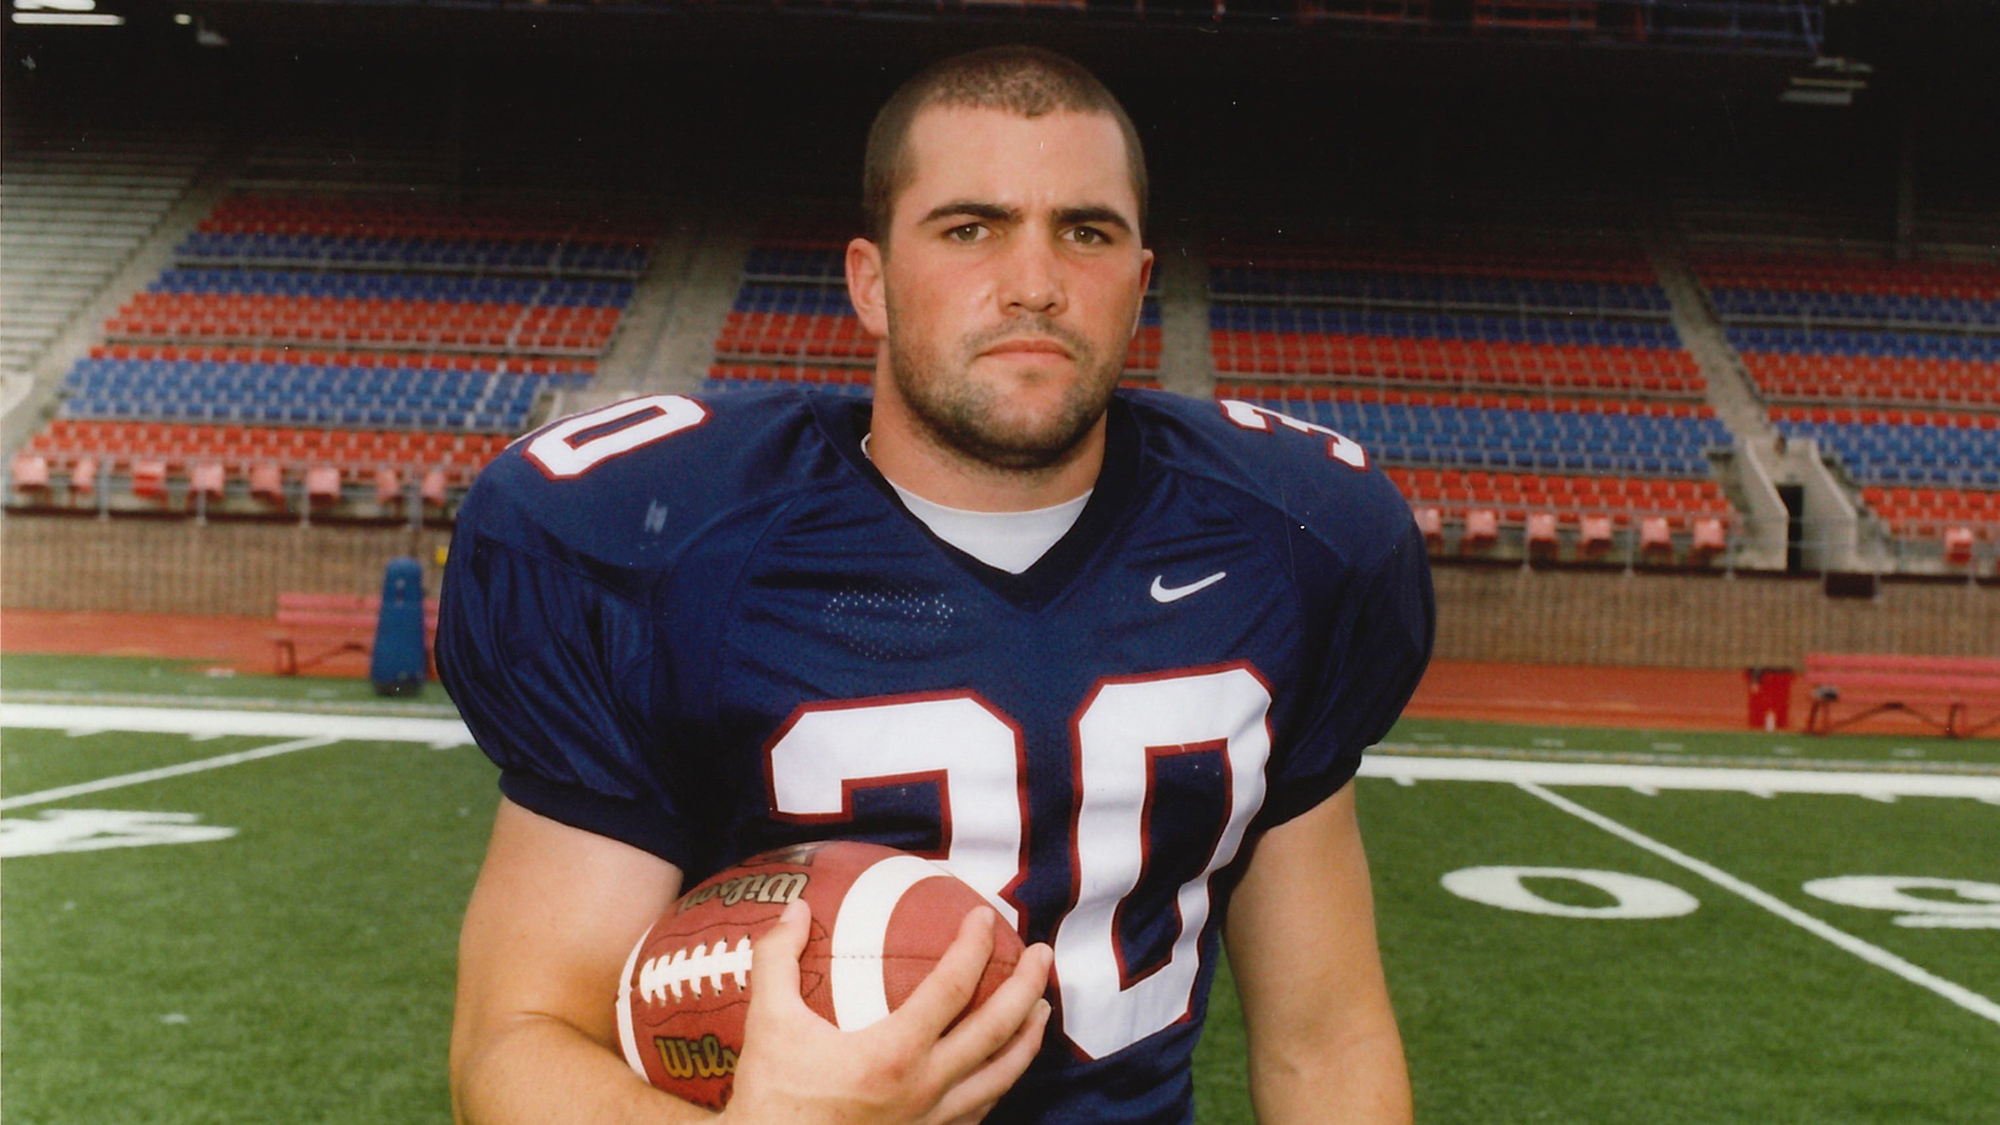 During his playing days at Penn, Kevin Stefanski poses with a football and wears his jersey at Franklin Field. 